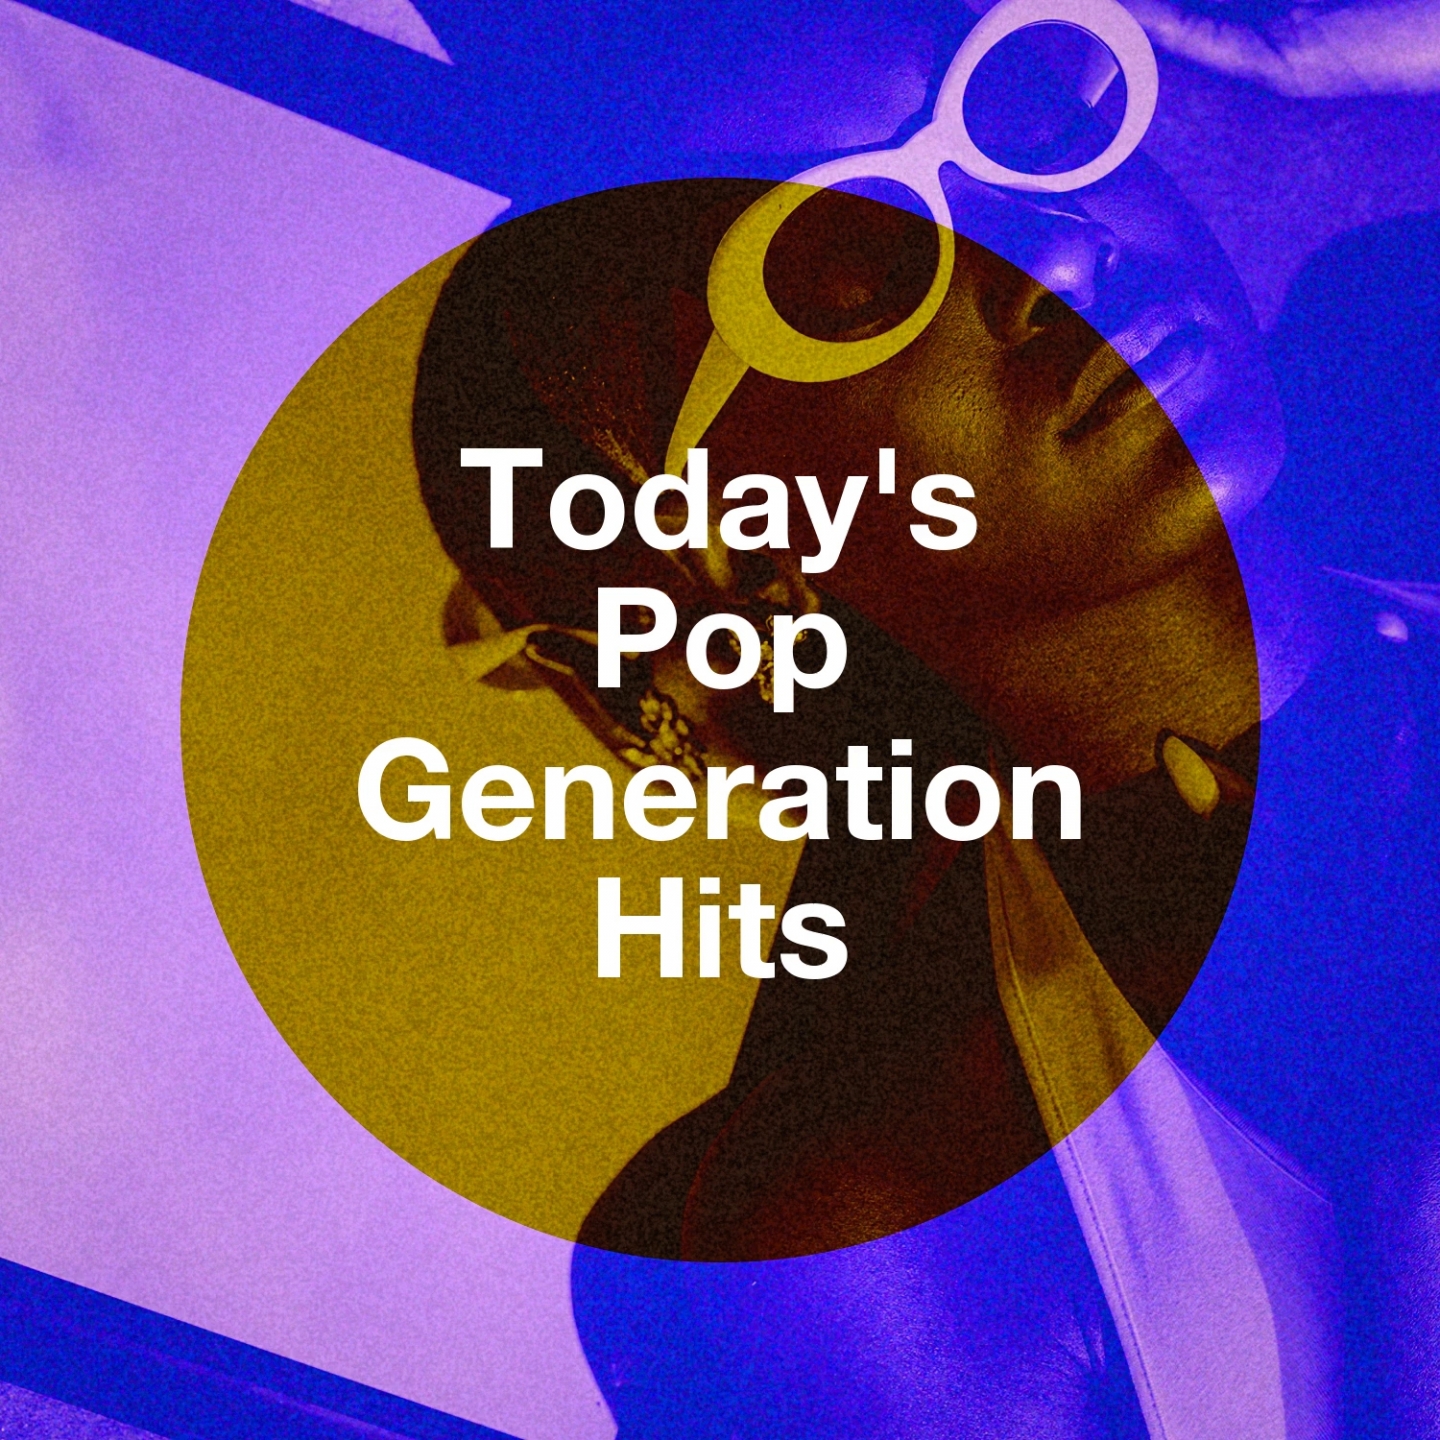 Today's Pop Generation Hits